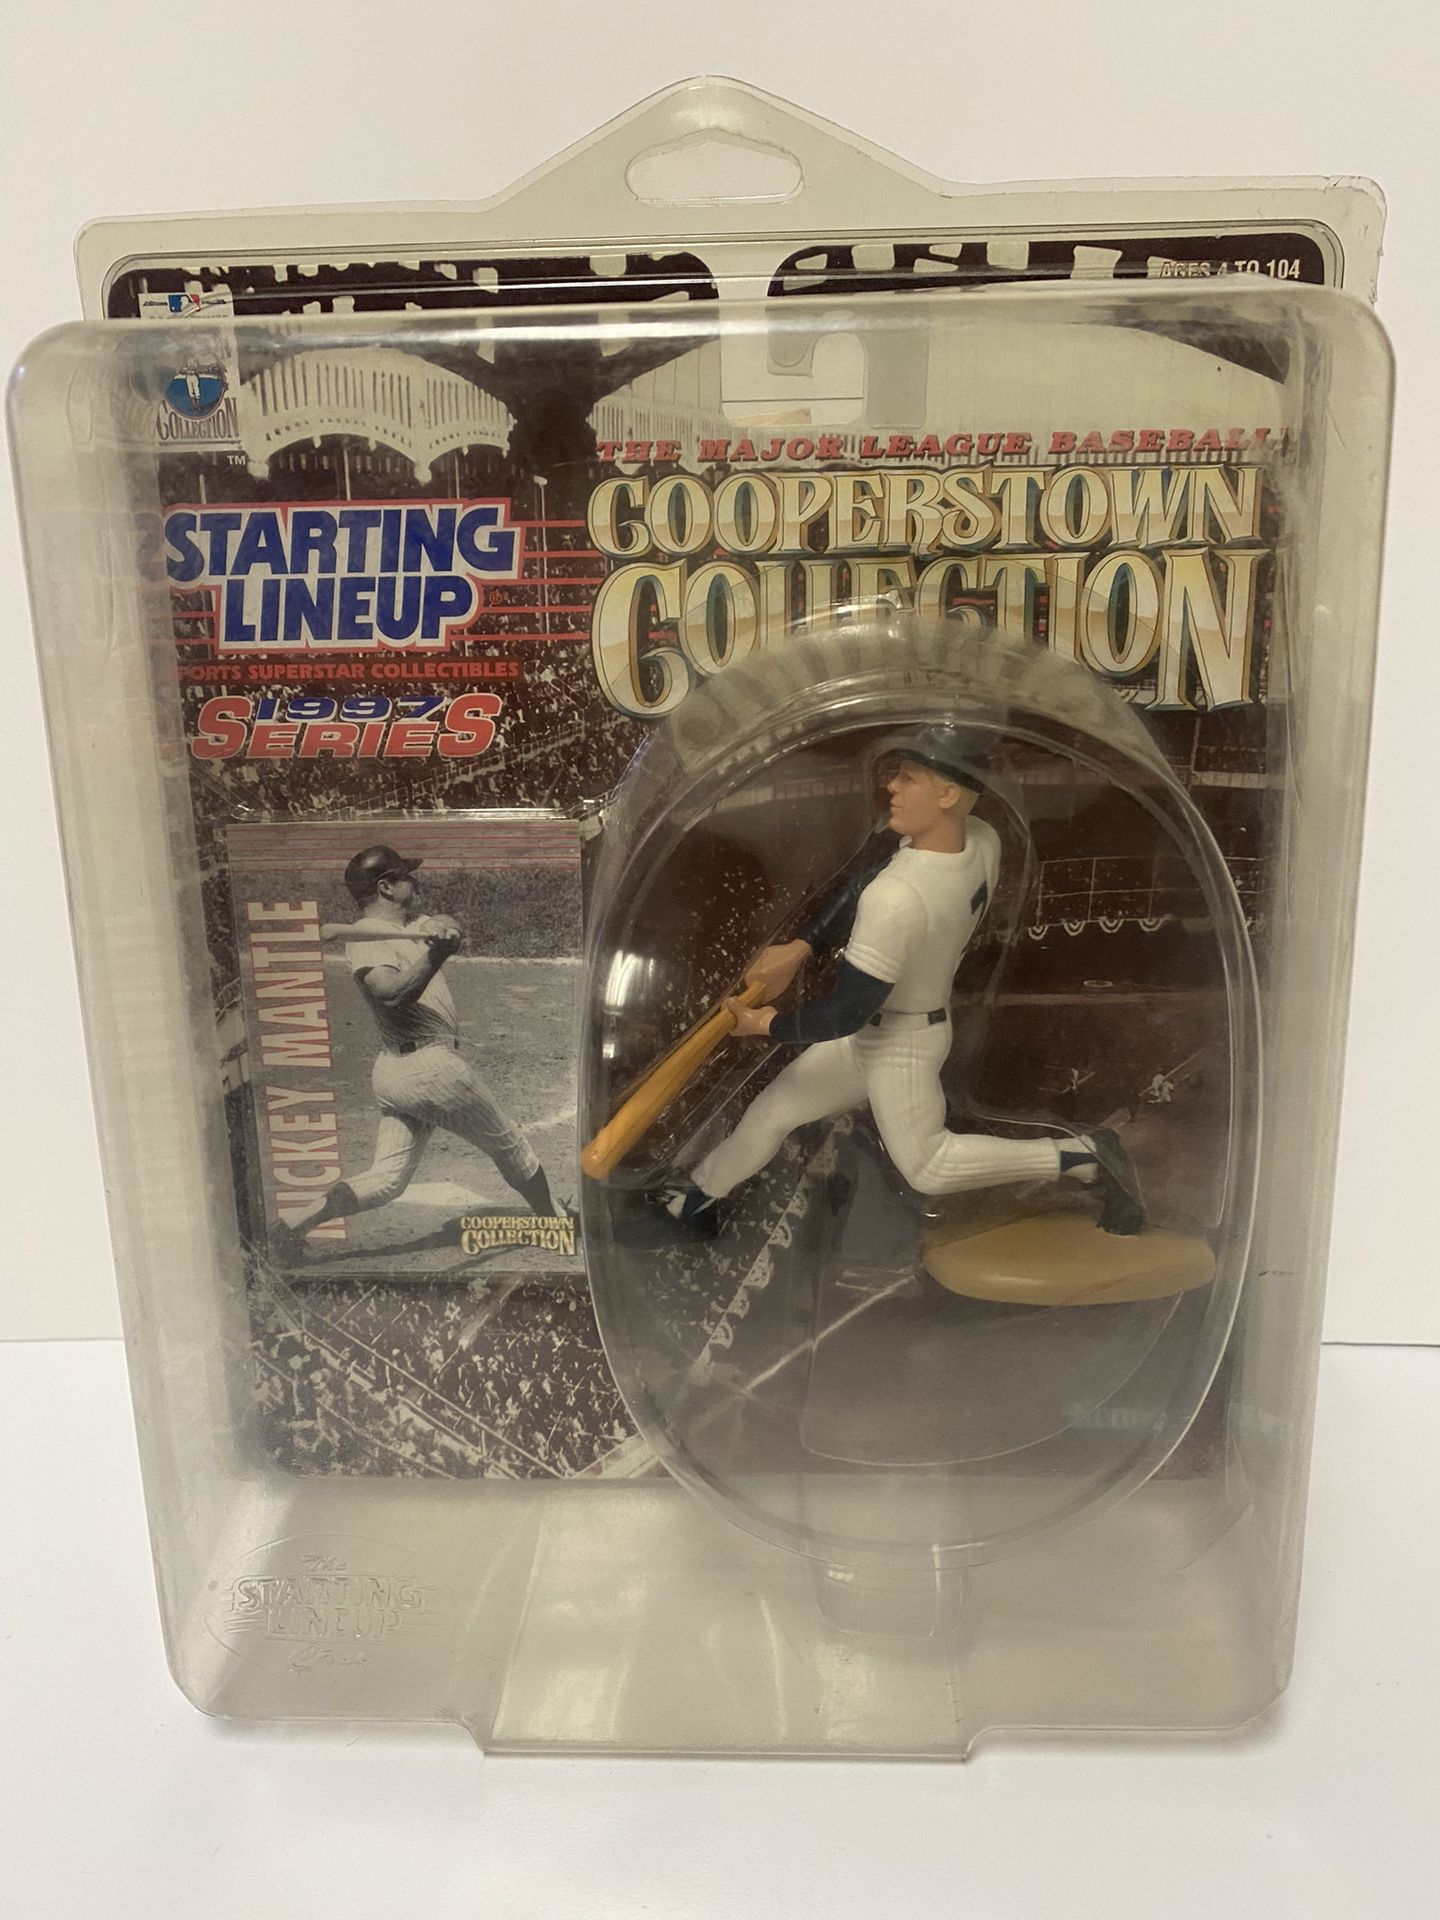 Starting Lineup 1997 SLU Cooperstown Collection MLB Mickey Mantle Action Figure